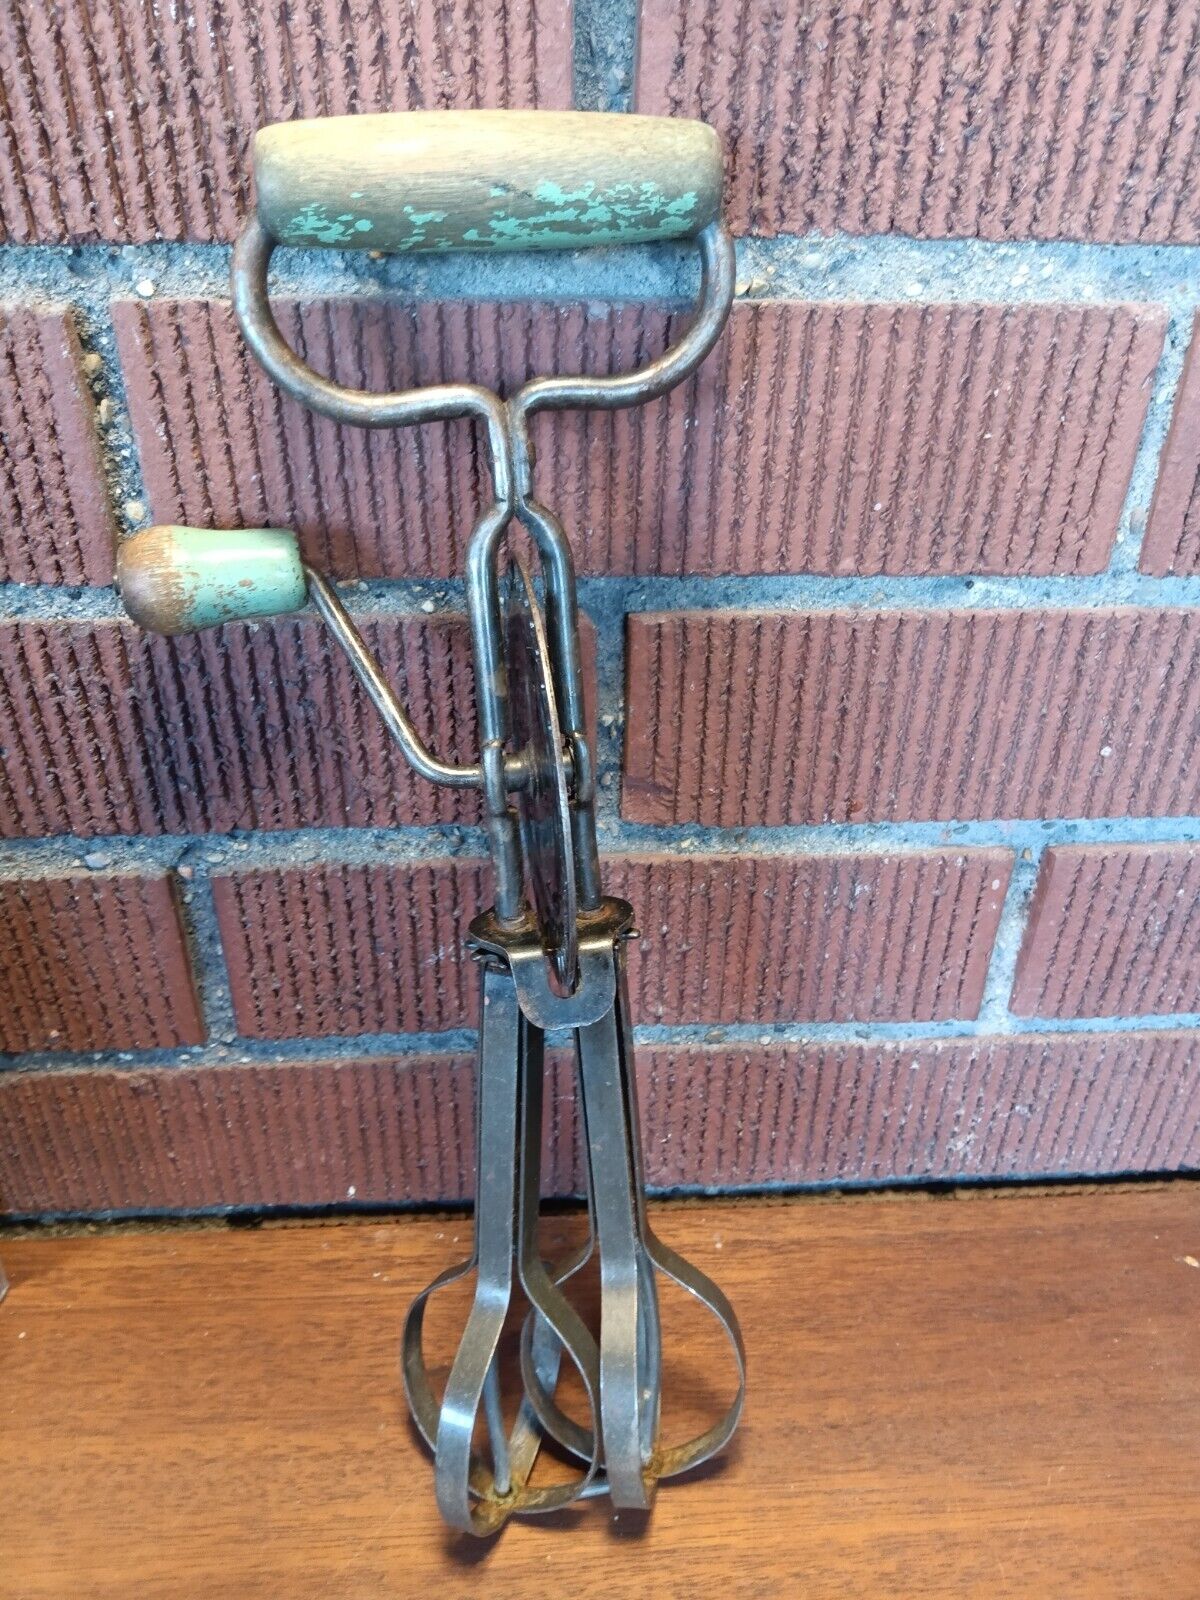 Vintage Stainless Steel Hand Mixer Edlund Company Green